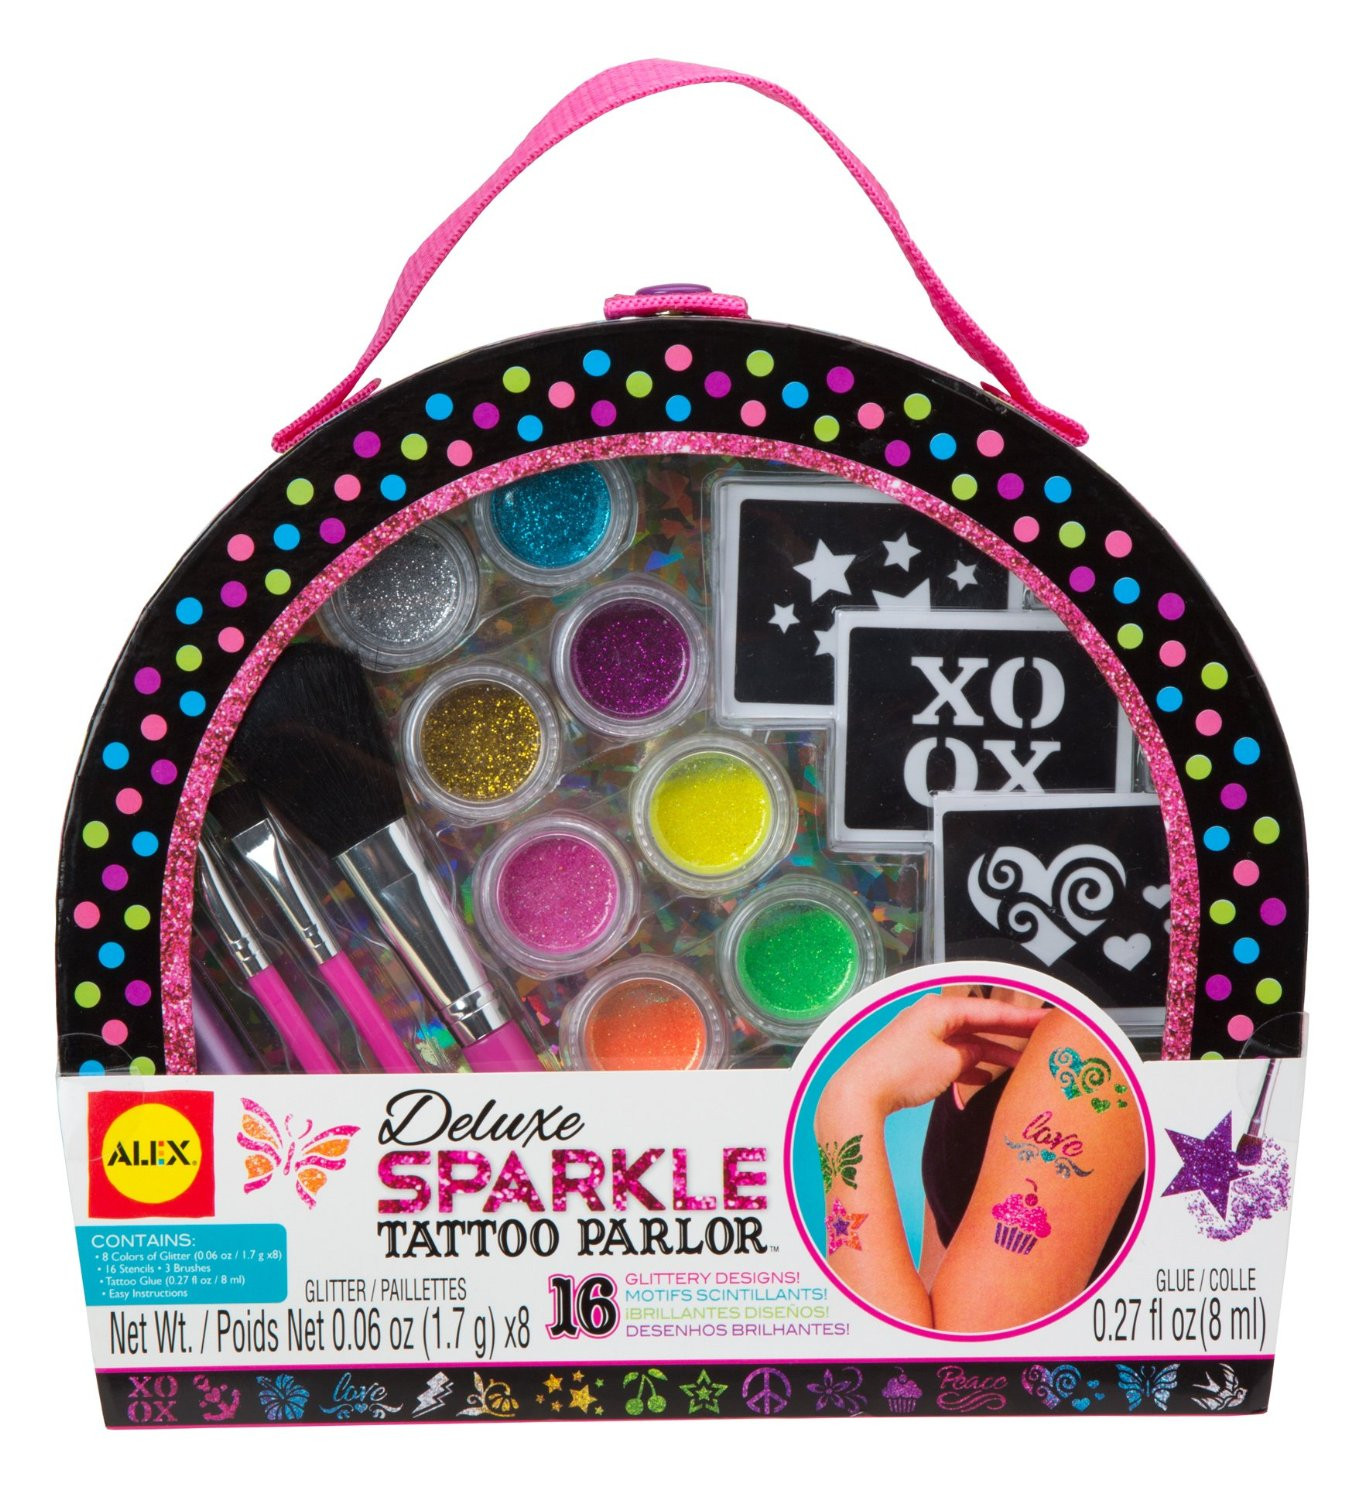 Cool Craft Kits
 ALEX Sparkle Tattoo Parlor Craft Kit The Toy Store With